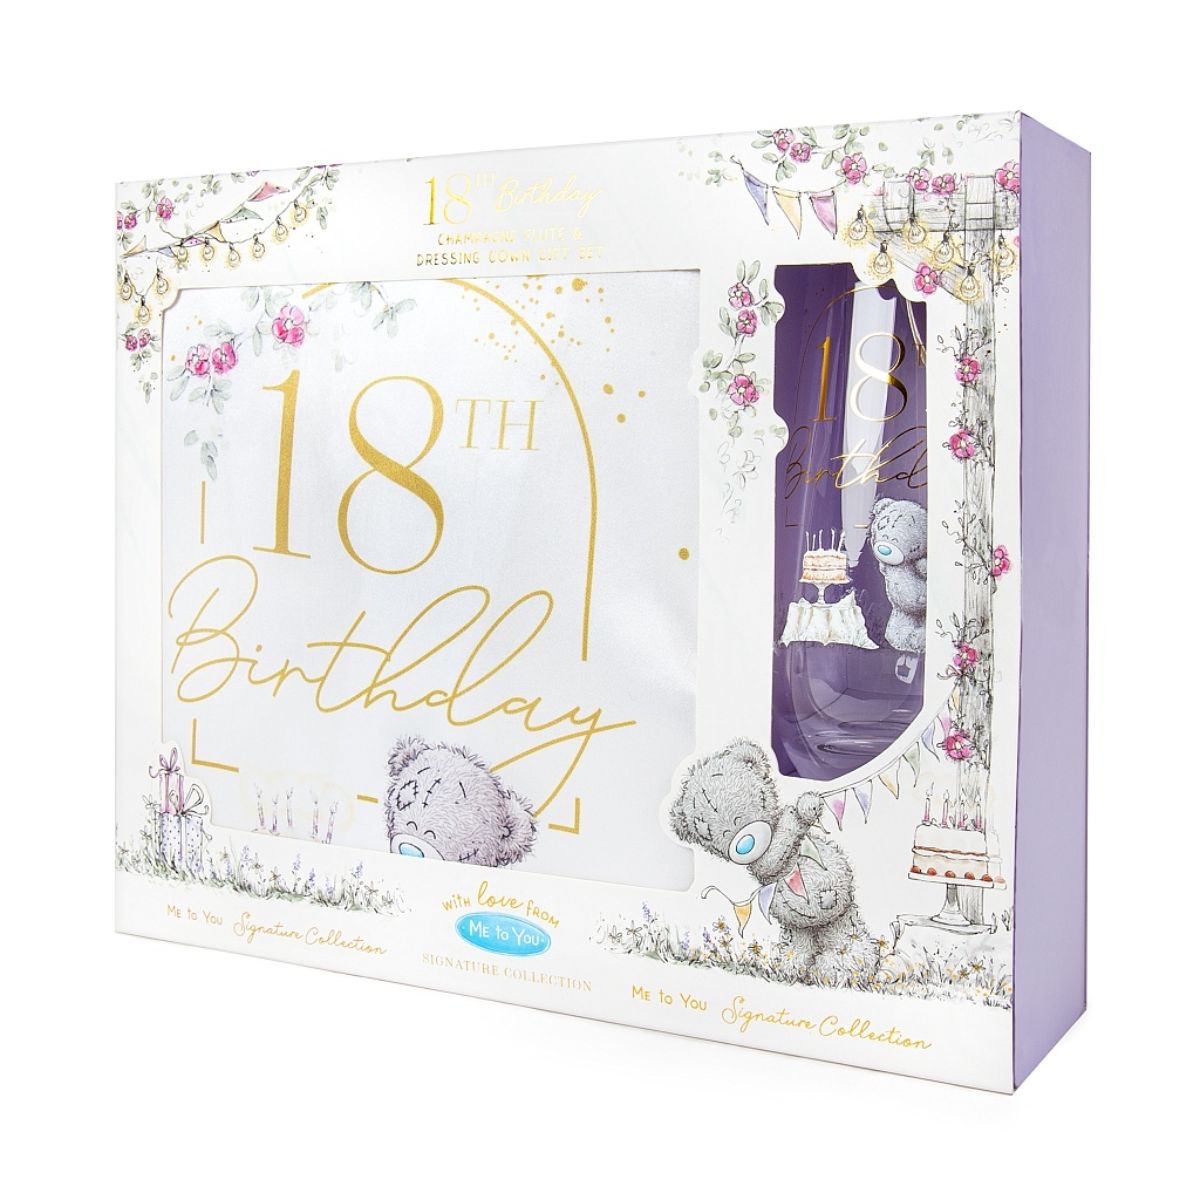 Me To You Signature Collection 18th Birthday Dressing Gown & Champagne Flute Set shown in pretty packaging.